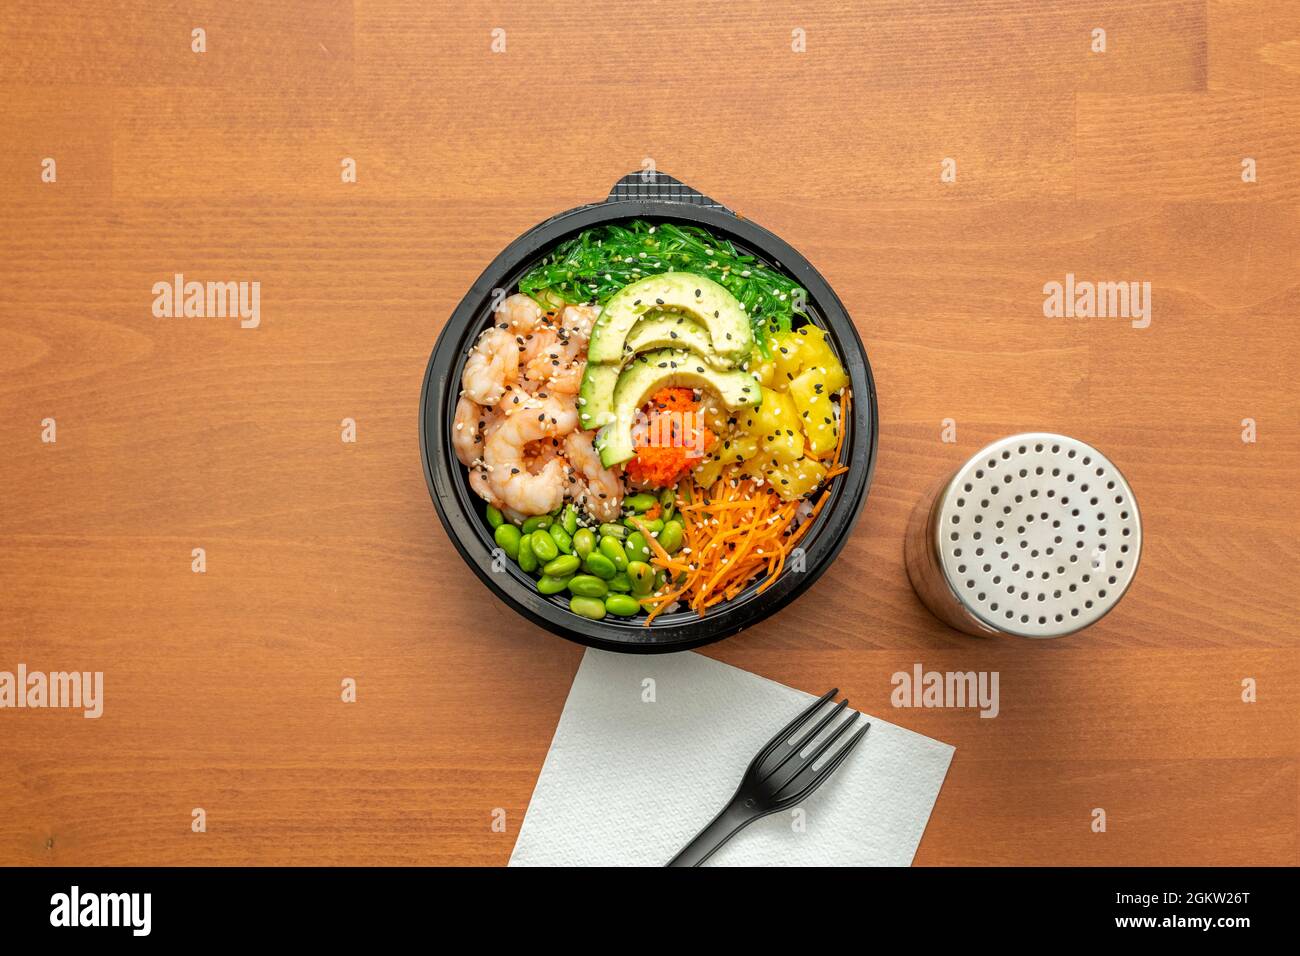 Cooked prawn poke bowl with edamame beans, grated carrot, diced mango, avocado slices, orange fish roe and wakame seaweed salad in a black home delive Stock Photo